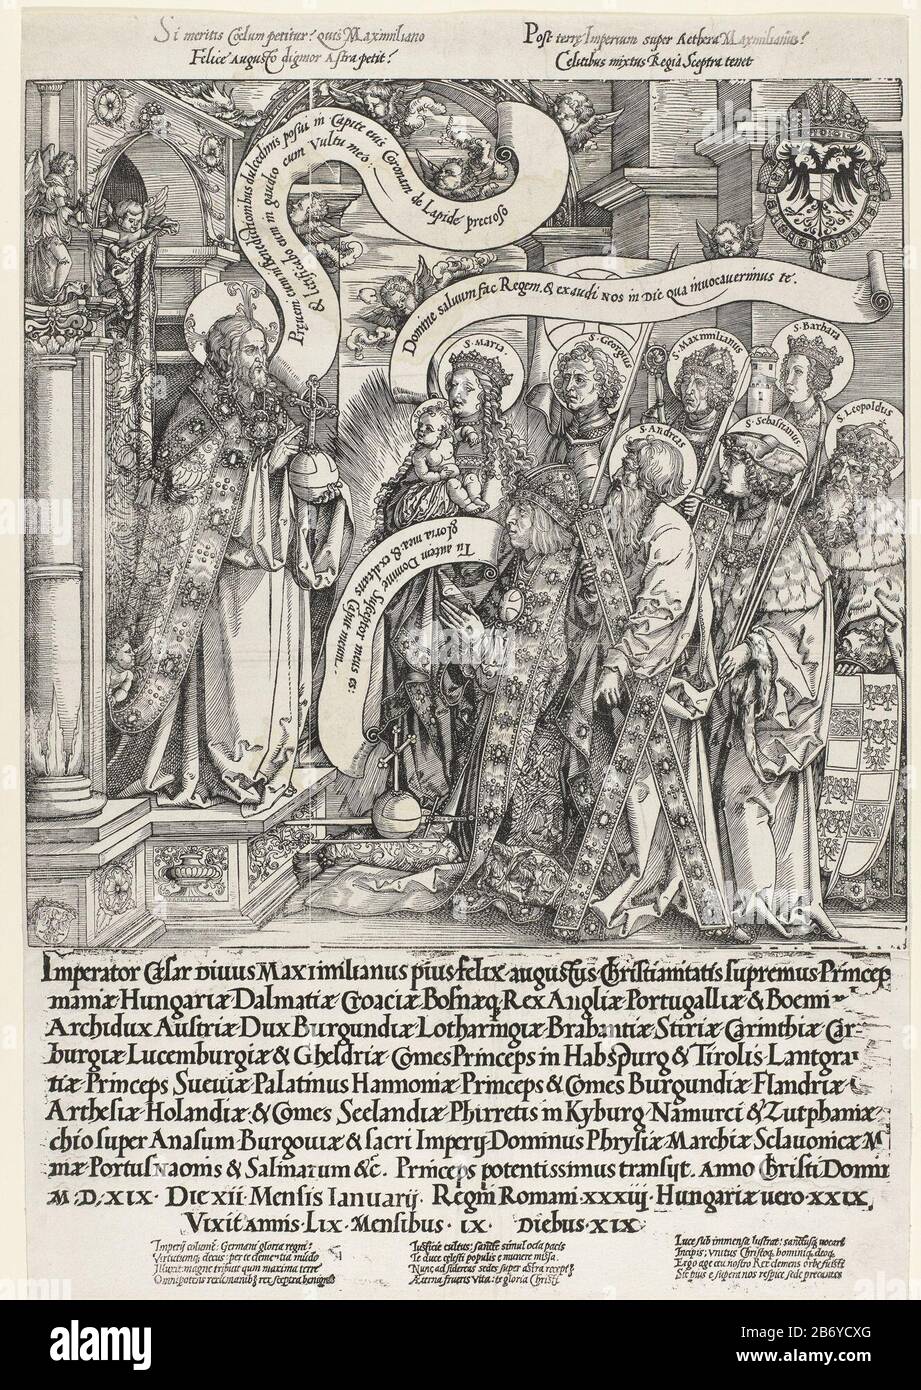 Keizer Maximiliaan I knielt voor Christus Emperor Maximilian I kneel before  Christ surrounded by Saint George, Maximilian, Barbara, Leopold, Sebastian,  Andrew and Mary with the Christ child. Within the presentation texts in